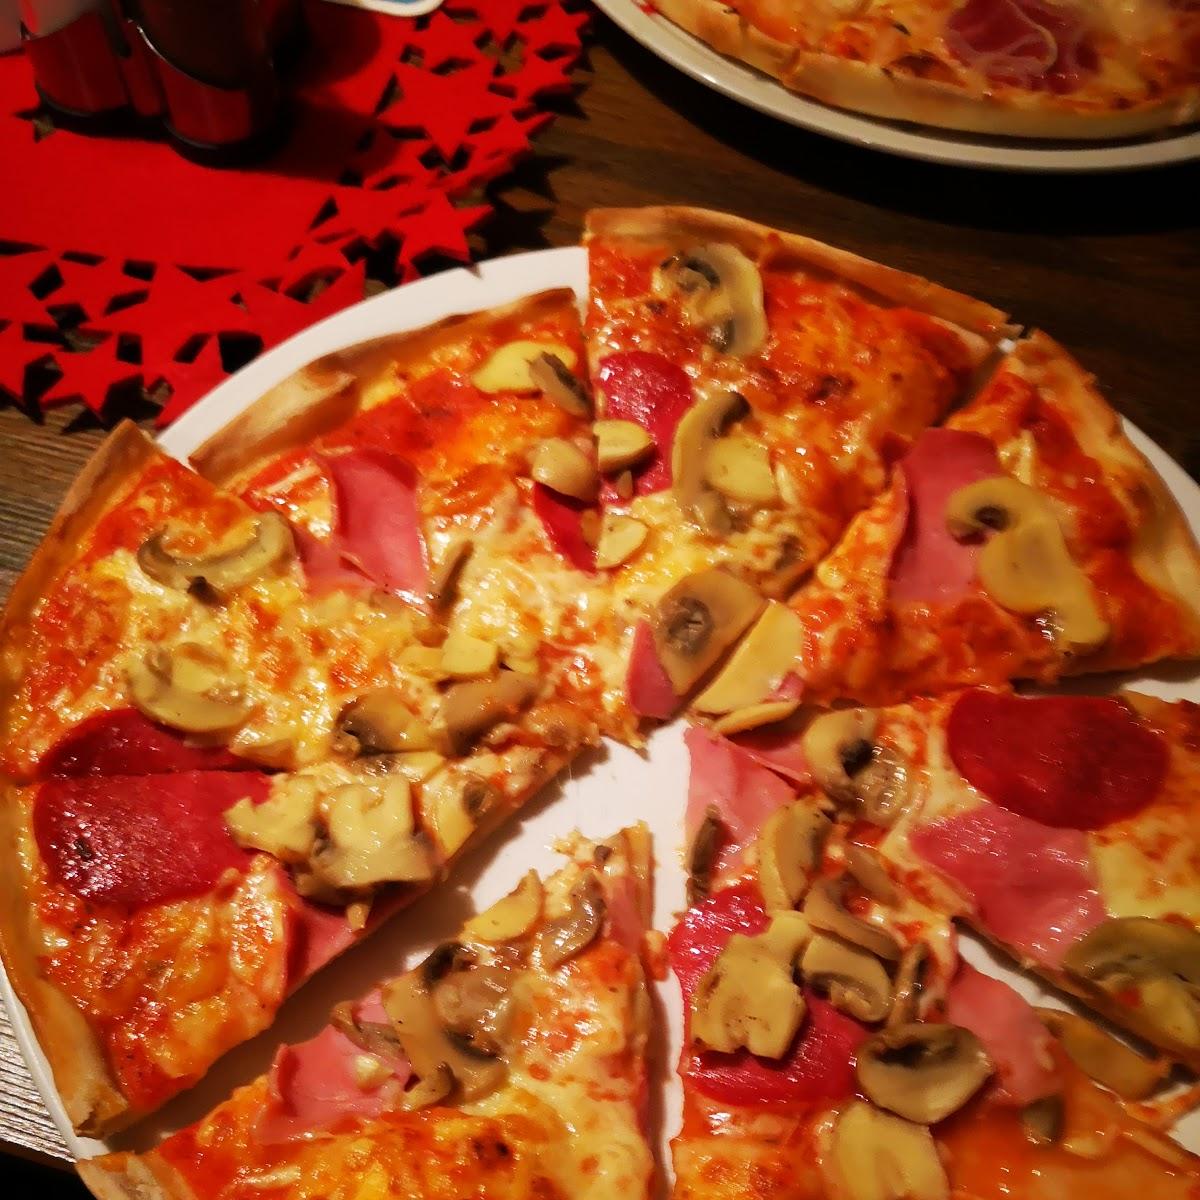 Restaurant "Pizzeria Mike" in Ansbach